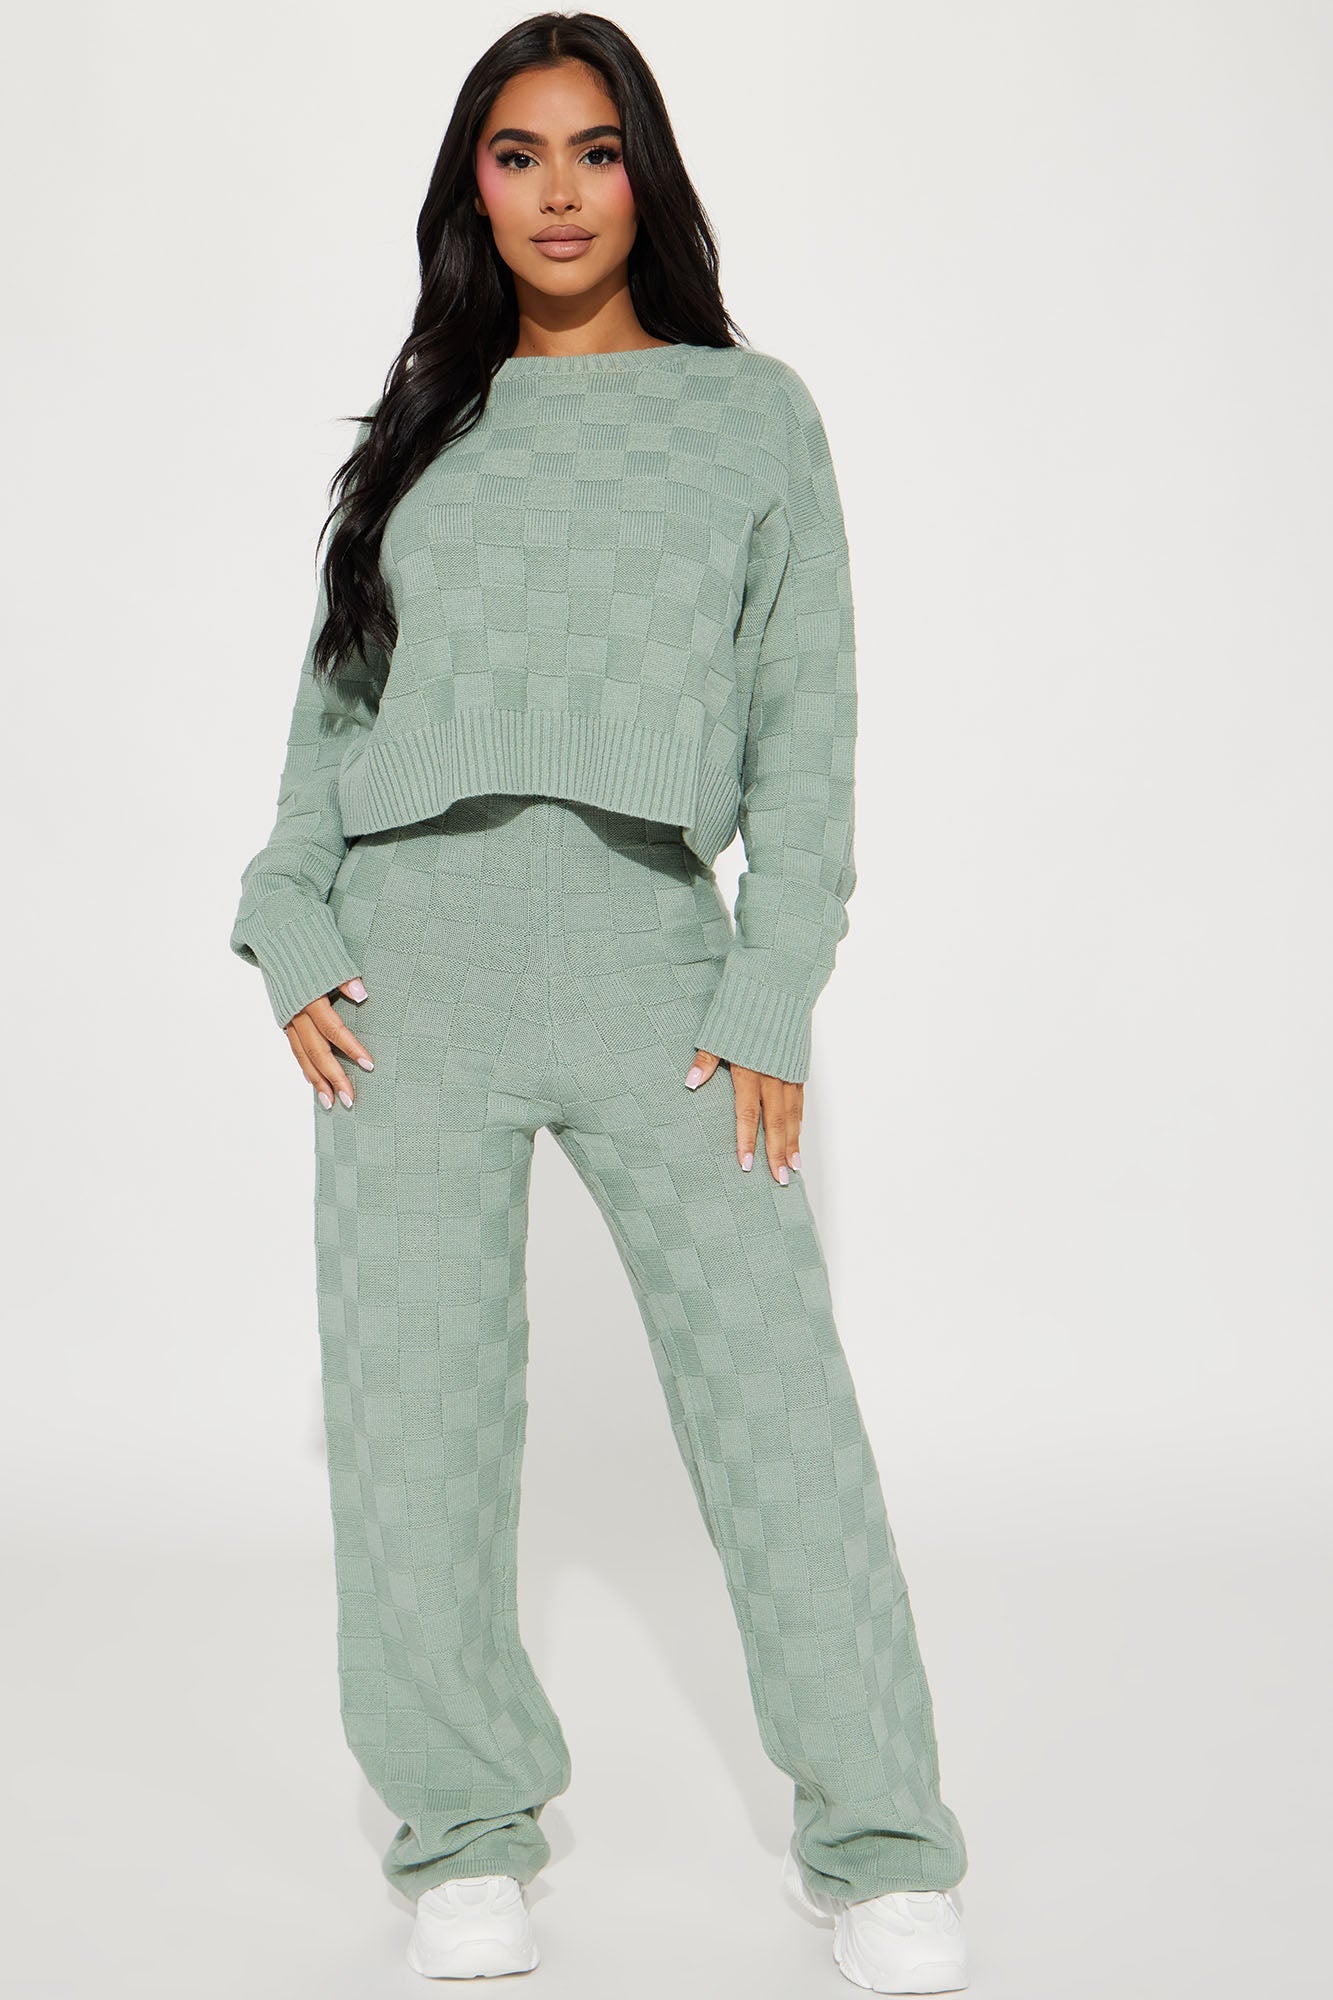 Let's Be Real Sweater Pant Set - Sage - HCWP 